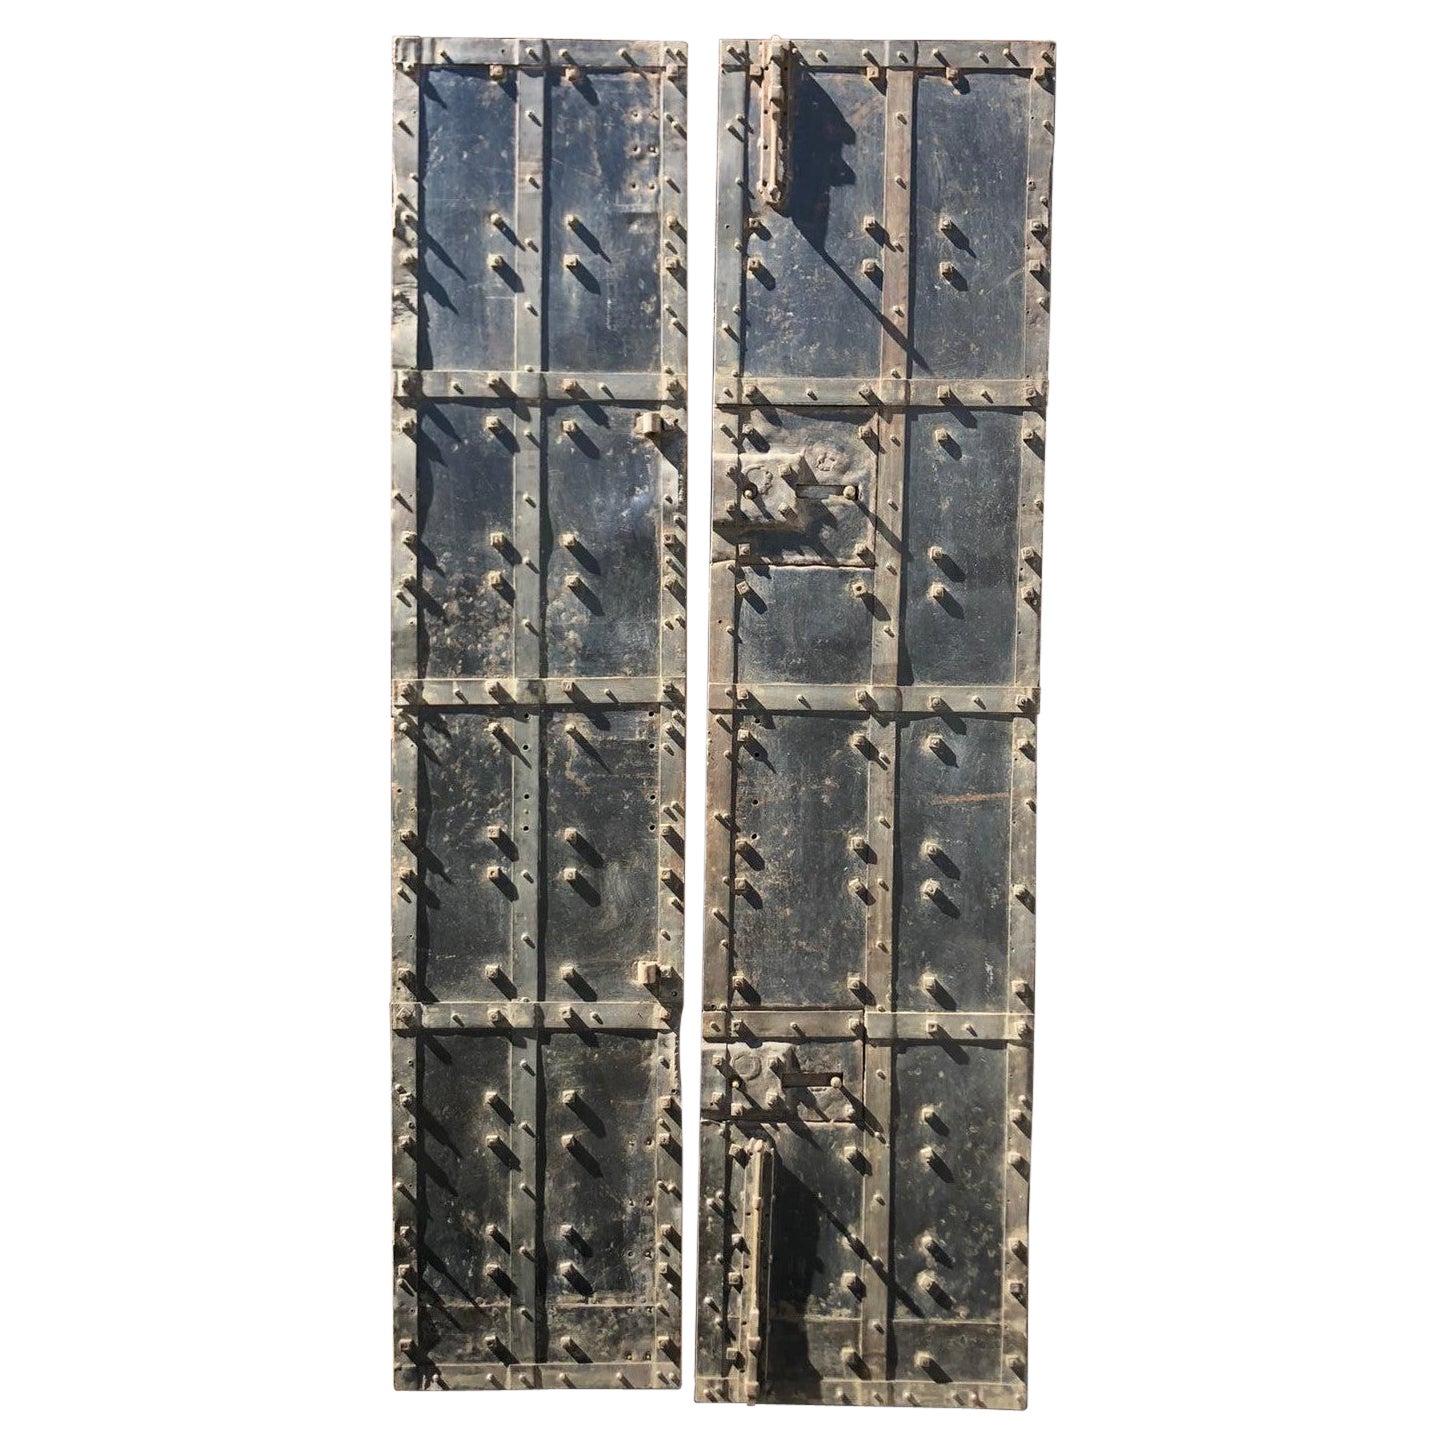 Double Prison Door in Wood and Iron, Nails & Bolts, 19th Century Italy